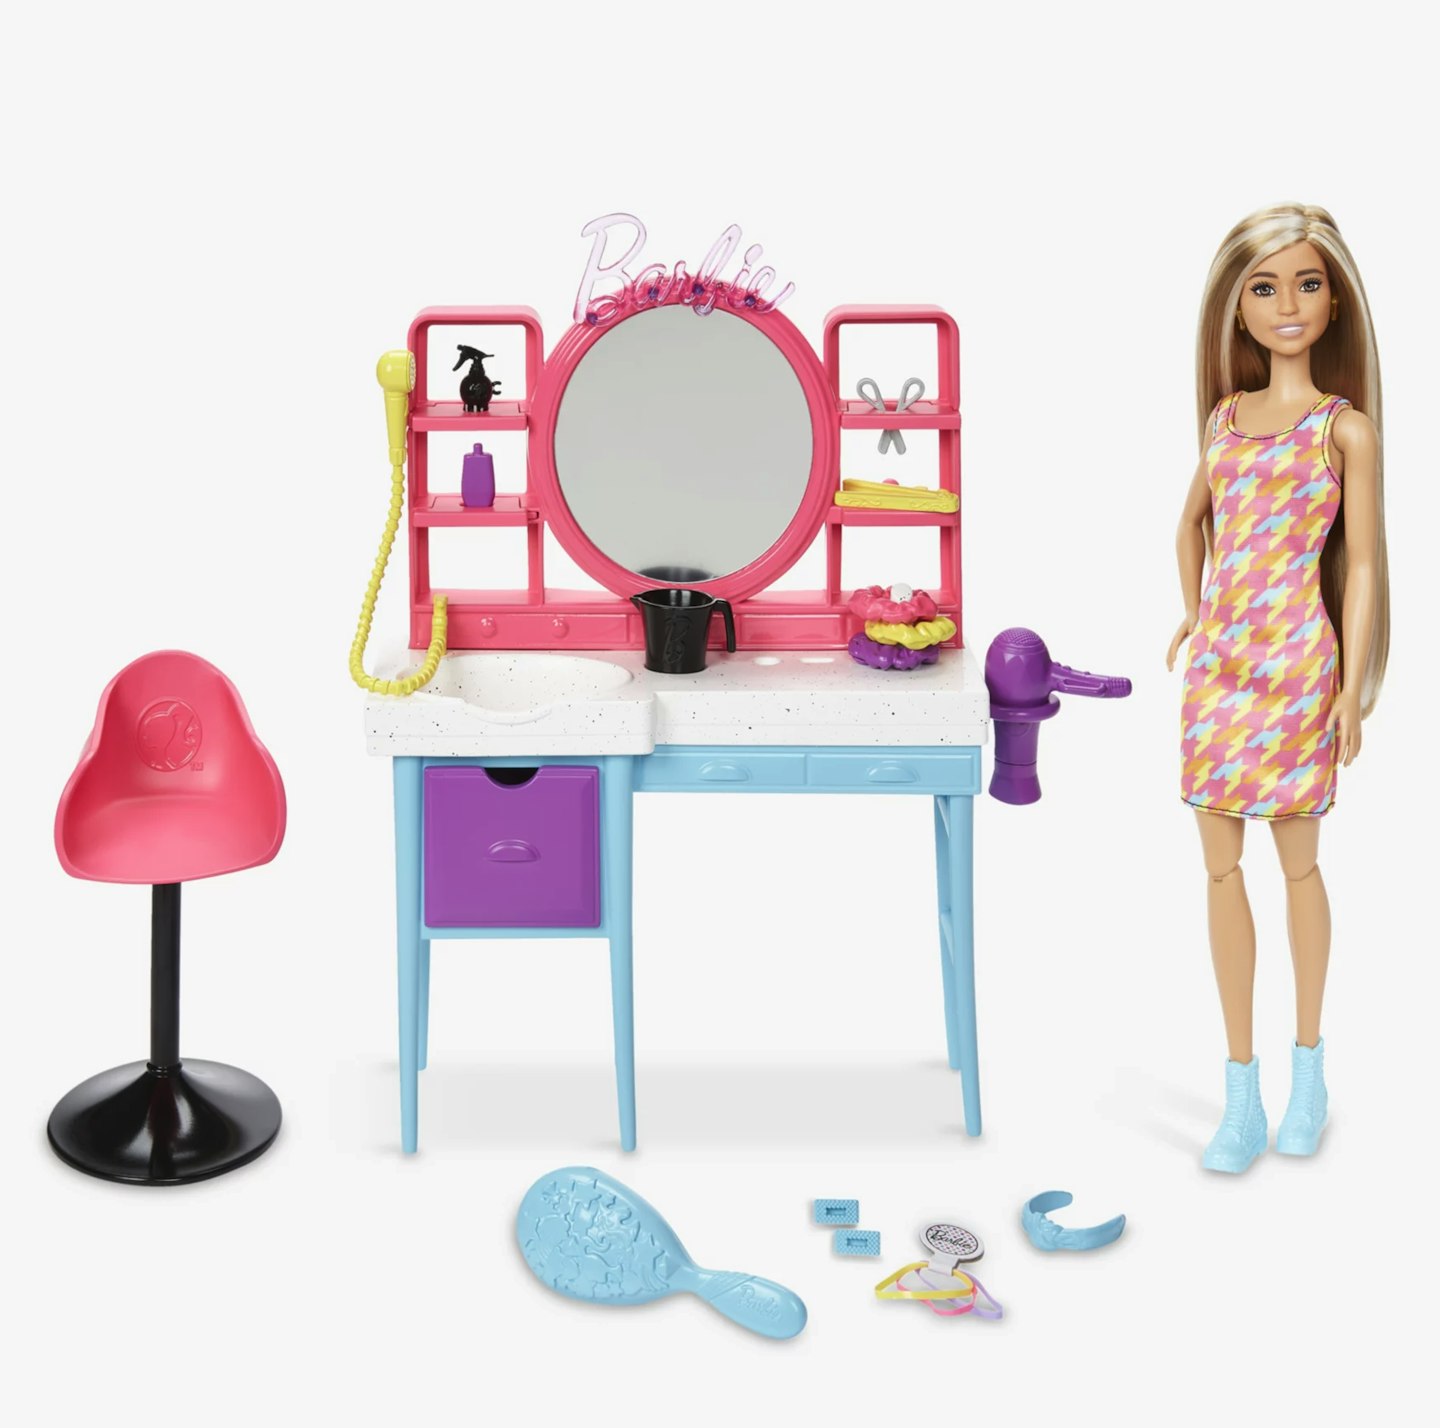 Barbie Doll and Hair Salon Playset, Long Color-Change Hair